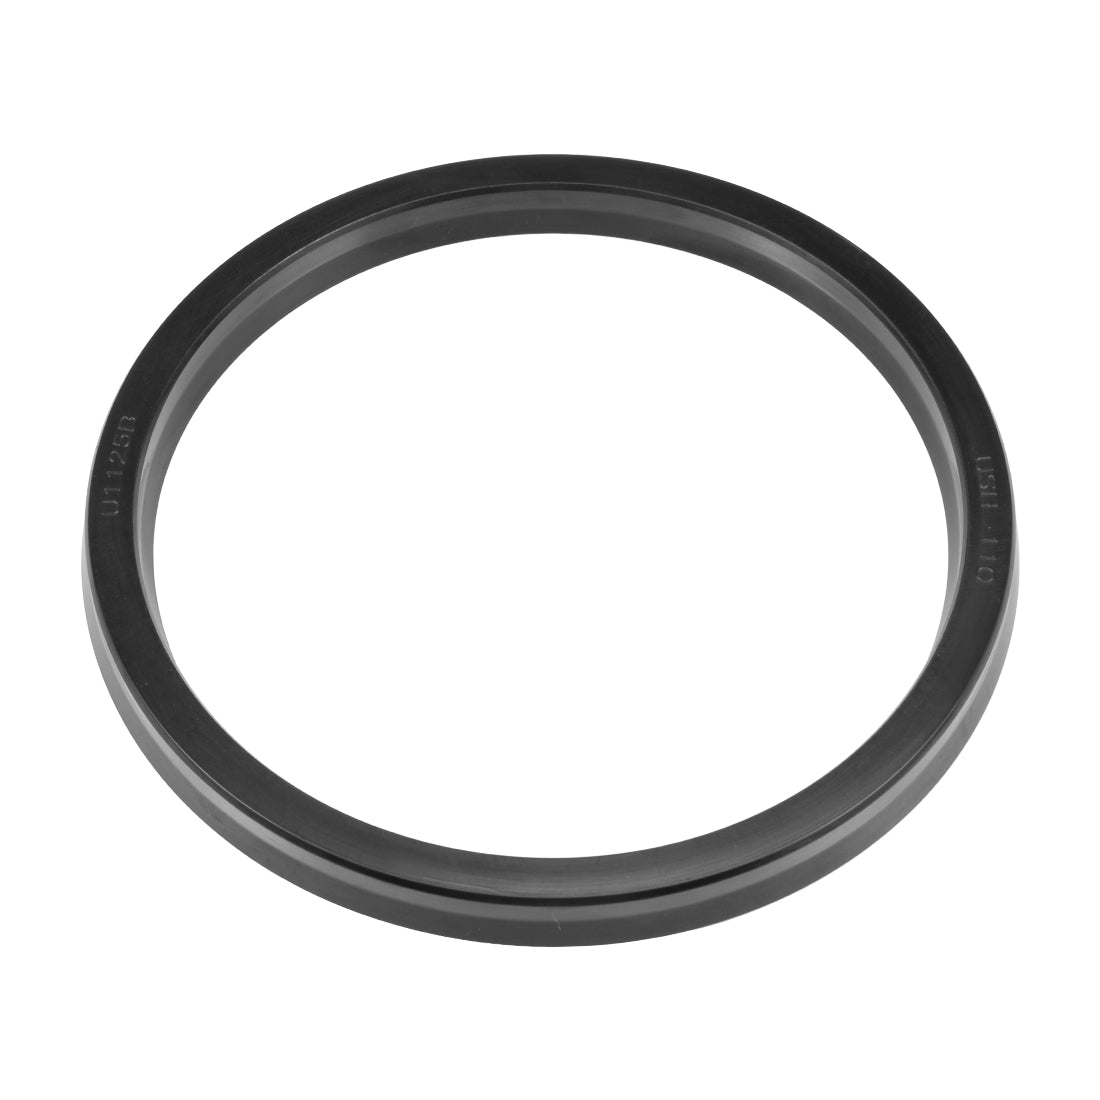 uxcell Uxcell Hydraulic Seal, Piston Shaft USH Oil Sealing O-Ring, 110mm x 125mm x 9mm